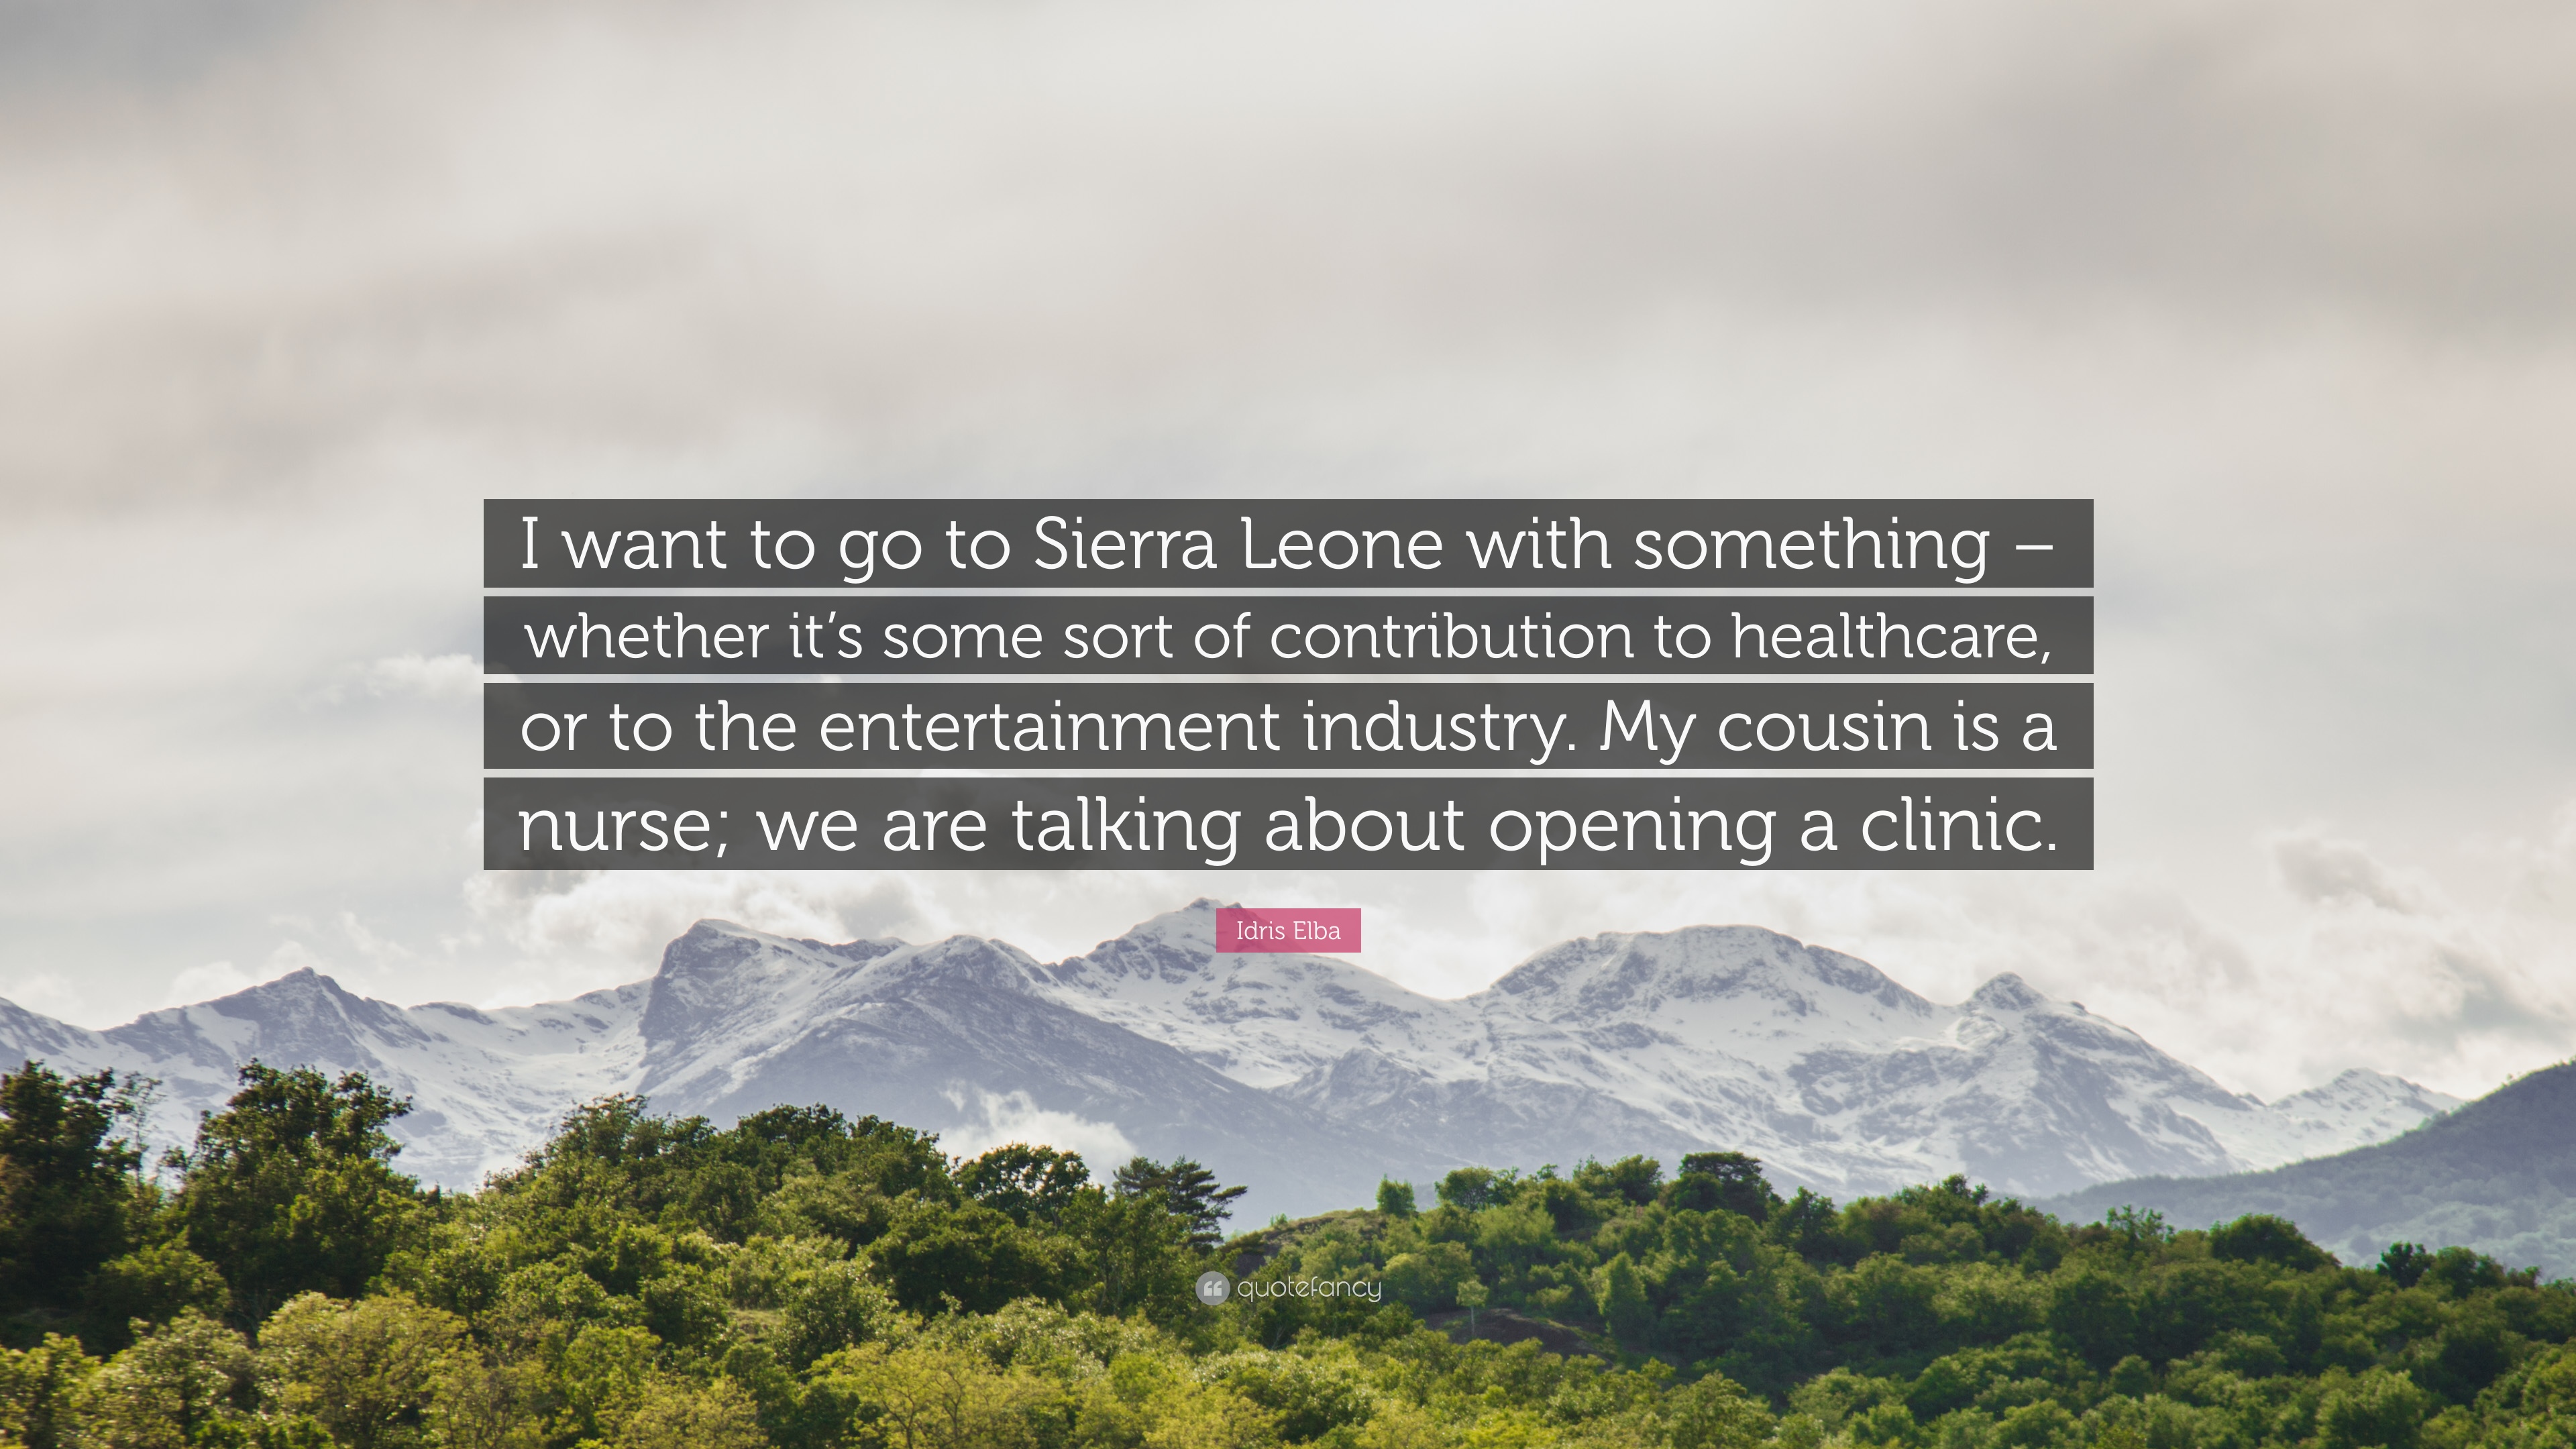 Idris Elba Quote: “I want to go to Sierra Leone with something